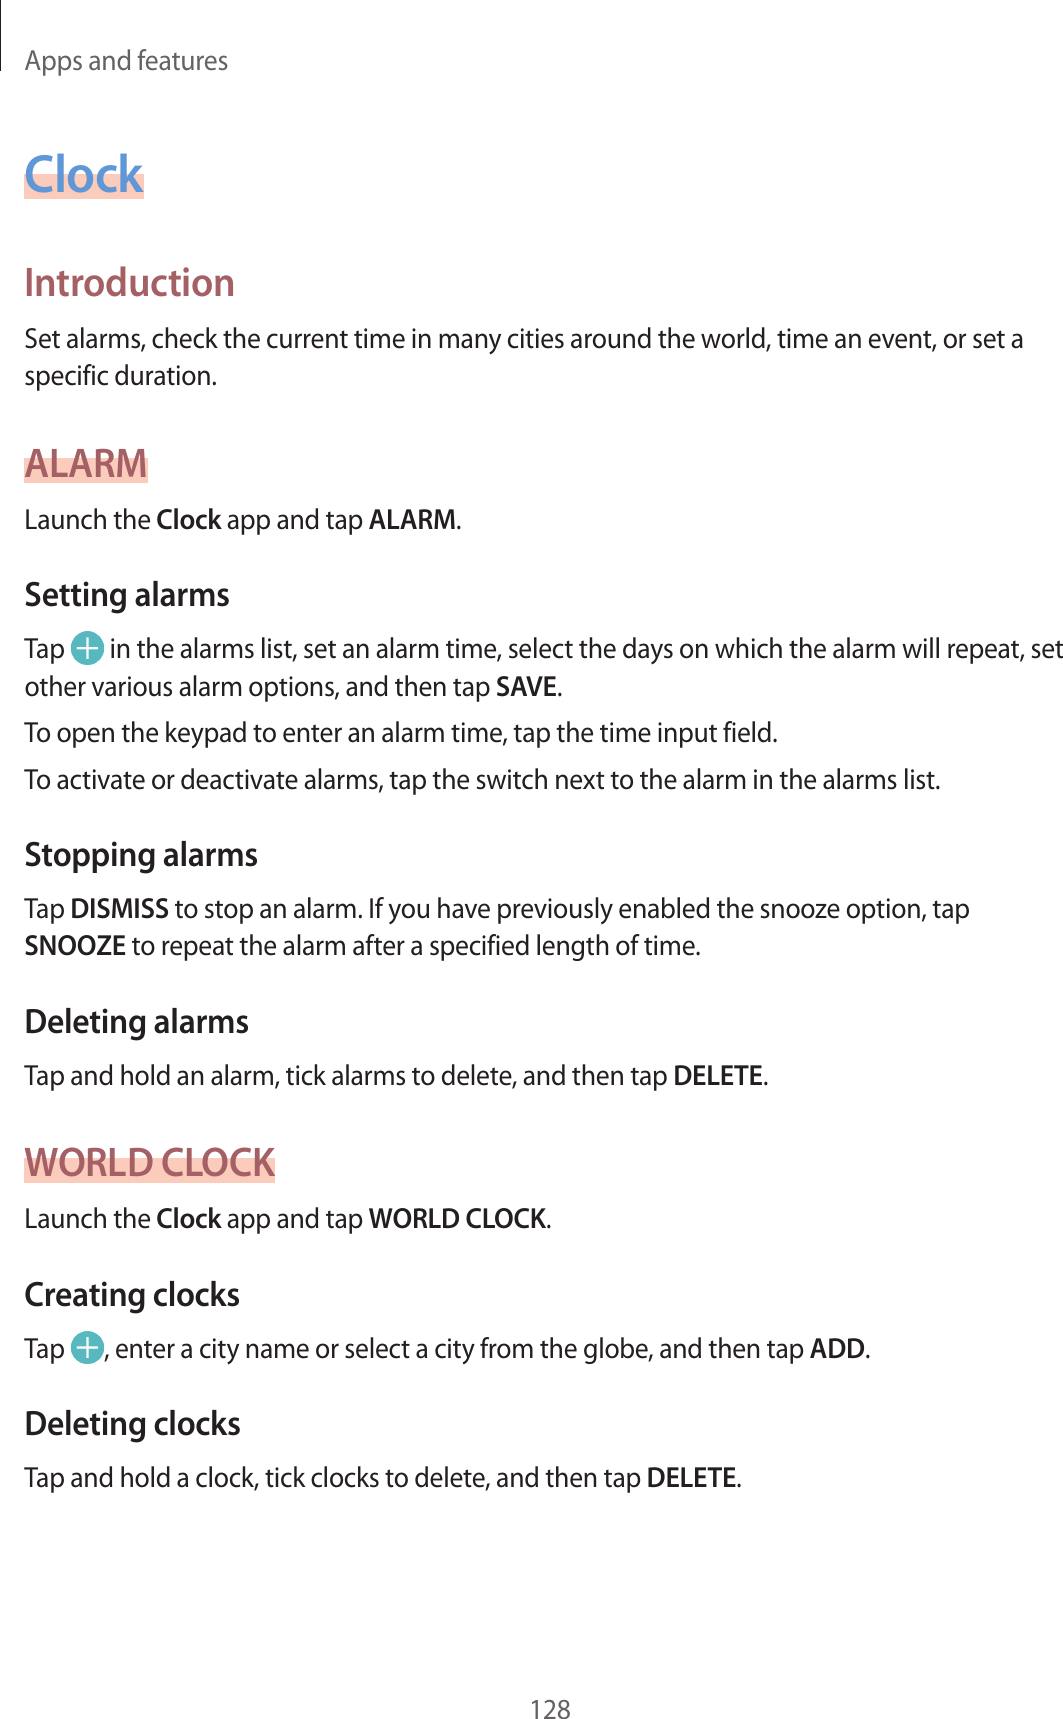 Apps and features128ClockIntroductionSet alarms, check the current time in many cities around the world, time an event, or set a specific duration.ALARMLaunch the Clock app and tap ALARM.Setting alarmsTap   in the alarms list, set an alarm time, select the days on which the alarm will repeat, set other various alarm options, and then tap SAVE.To open the keypad to enter an alarm time, tap the time input field.To activate or deactivate alarms, tap the switch next to the alarm in the alarms list.Stopping alarmsTap DISMISS to stop an alarm. If you have previously enabled the snooze option, tap SNOOZE to repeat the alarm after a specified length of time.Deleting alarmsTap and hold an alarm, tick alarms to delete, and then tap DELETE.WORLD CLOCKLaunch the Clock app and tap WORLD CLOCK.Creating clocksTap  , enter a city name or select a city from the globe, and then tap ADD.Deleting clocksTap and hold a clock, tick clocks to delete, and then tap DELETE.